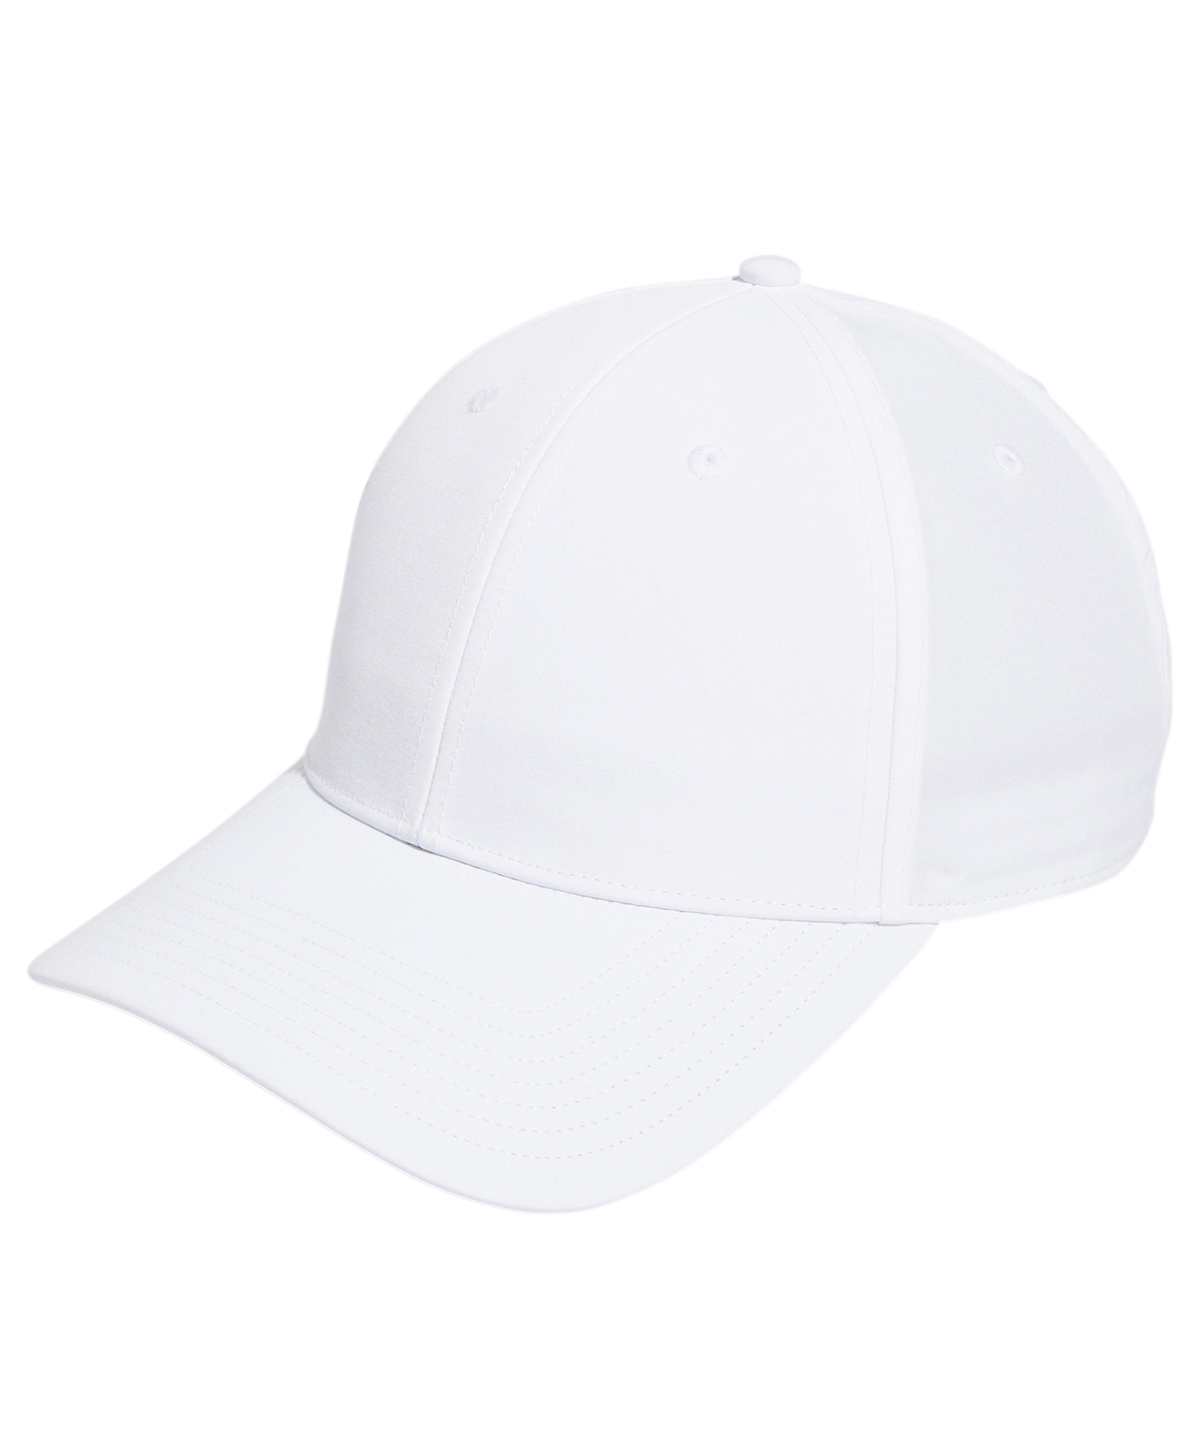 Adidas Golf Performance Crestable Cap White Size One Size